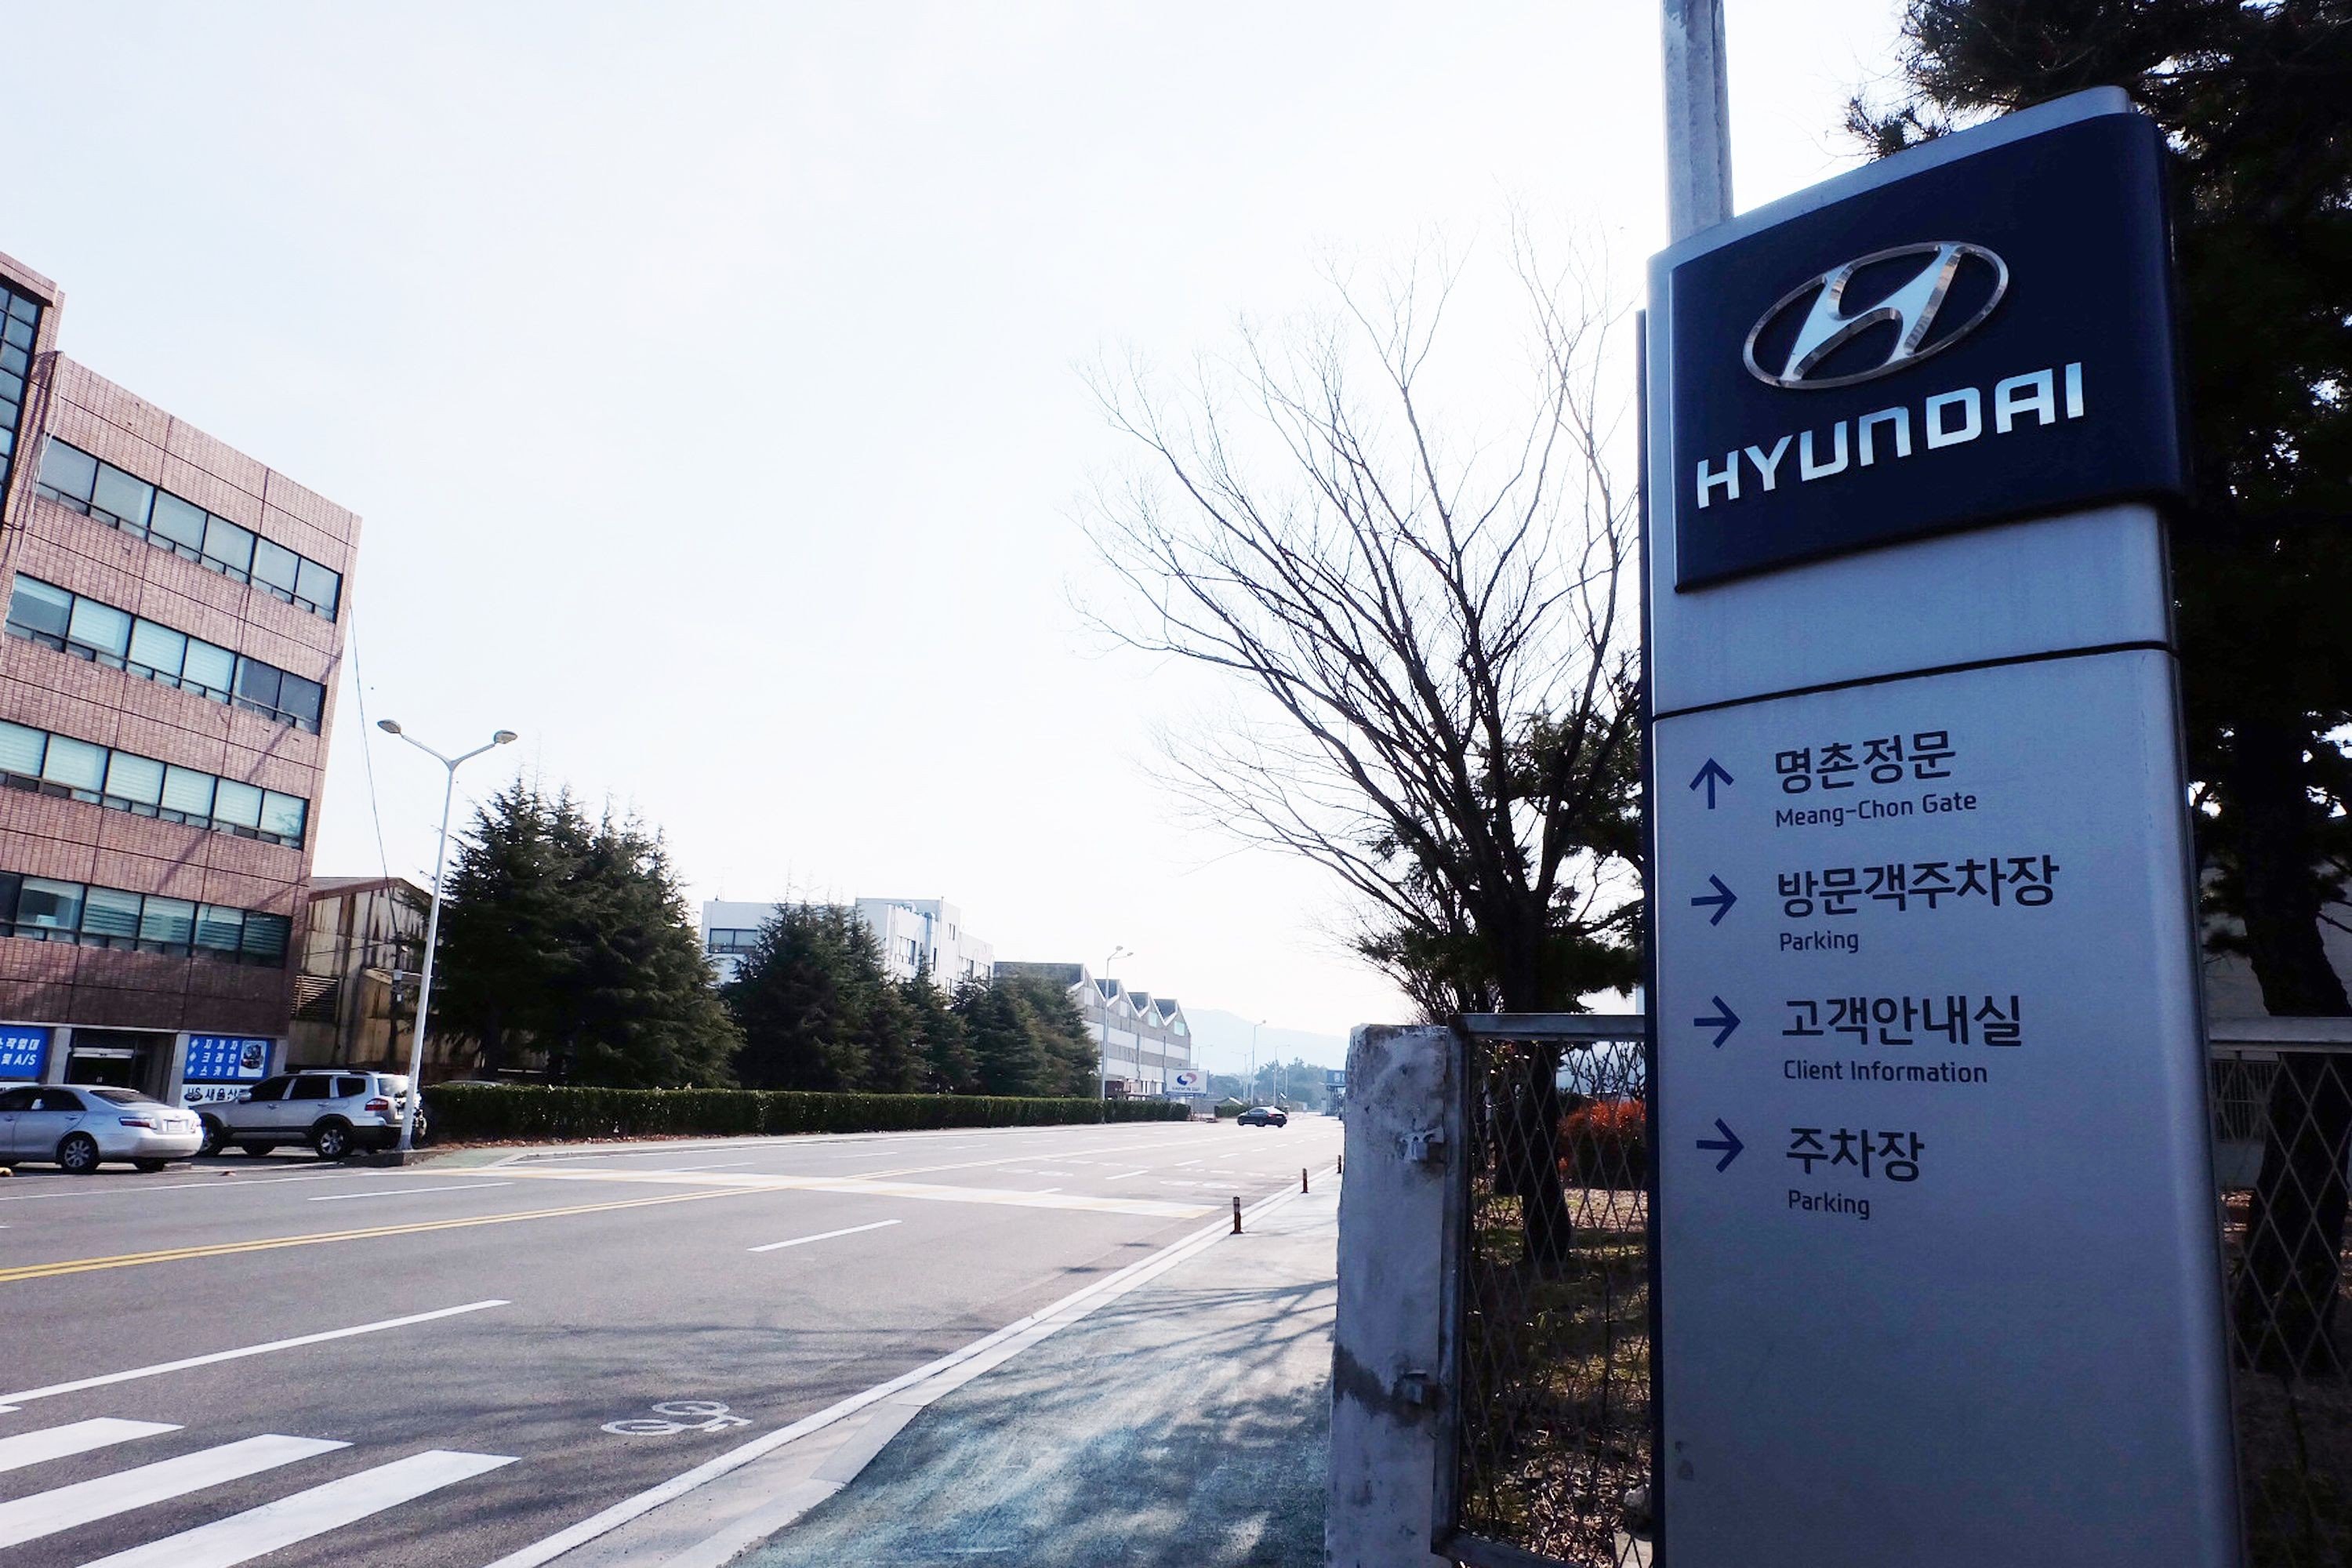 The most productive car factory in the world fell quiet on February 7 as South Korea’s Hyundai suspended operations at its giant Ulsan complex, hamstrung by a lack of parts as the coronavirus outbreak crippled China's industrial output. Photo: AFP